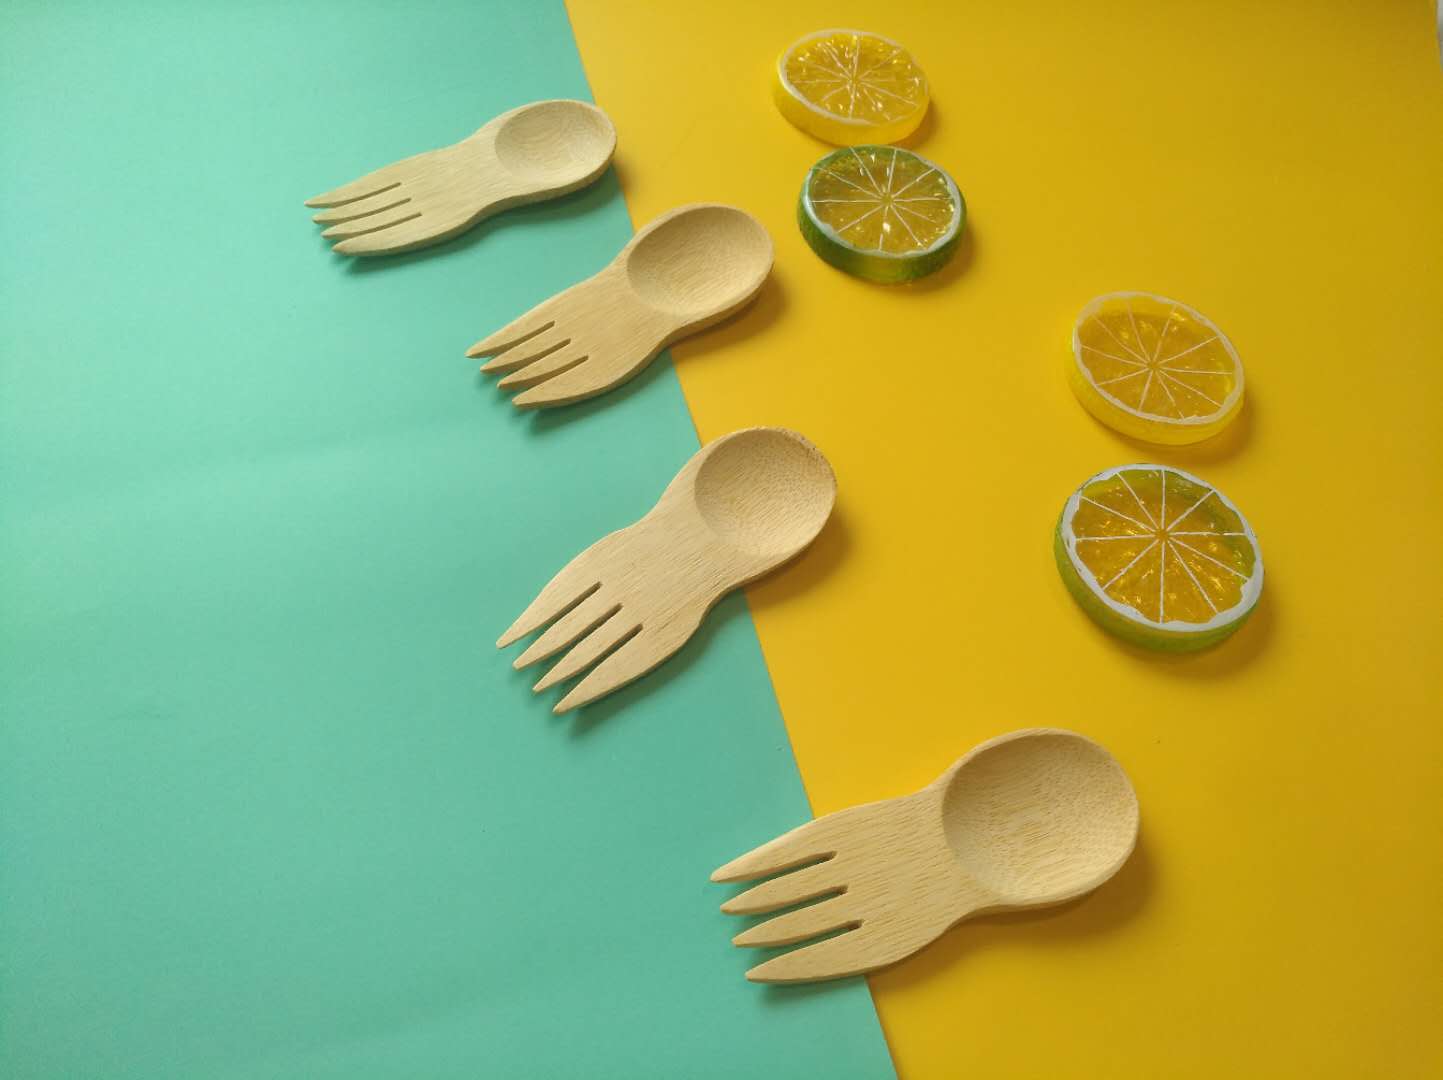 100 Biodegradable Bamboo cutlery sets with Customized Logo Reusable eco friendly bamboo forks